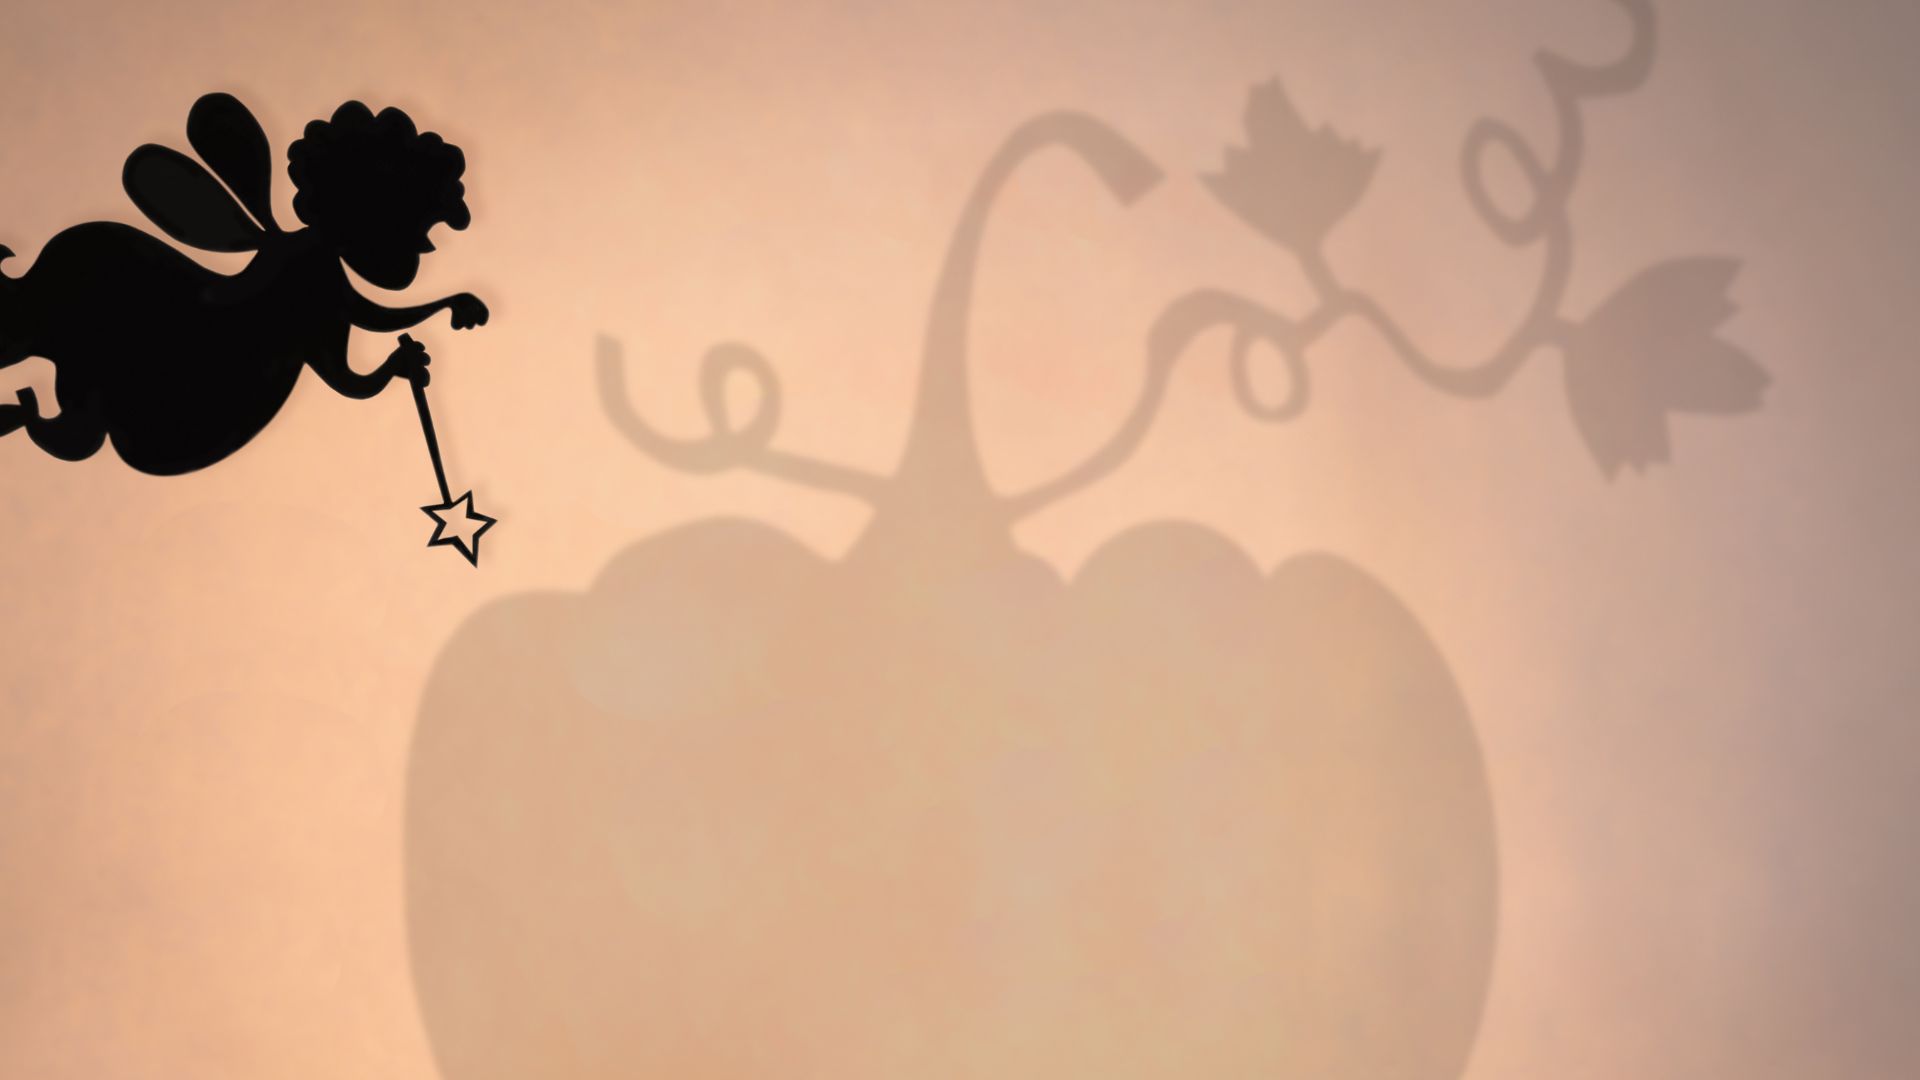 Silhouette animation where a fairy is shown against a silhouette of a magic apple